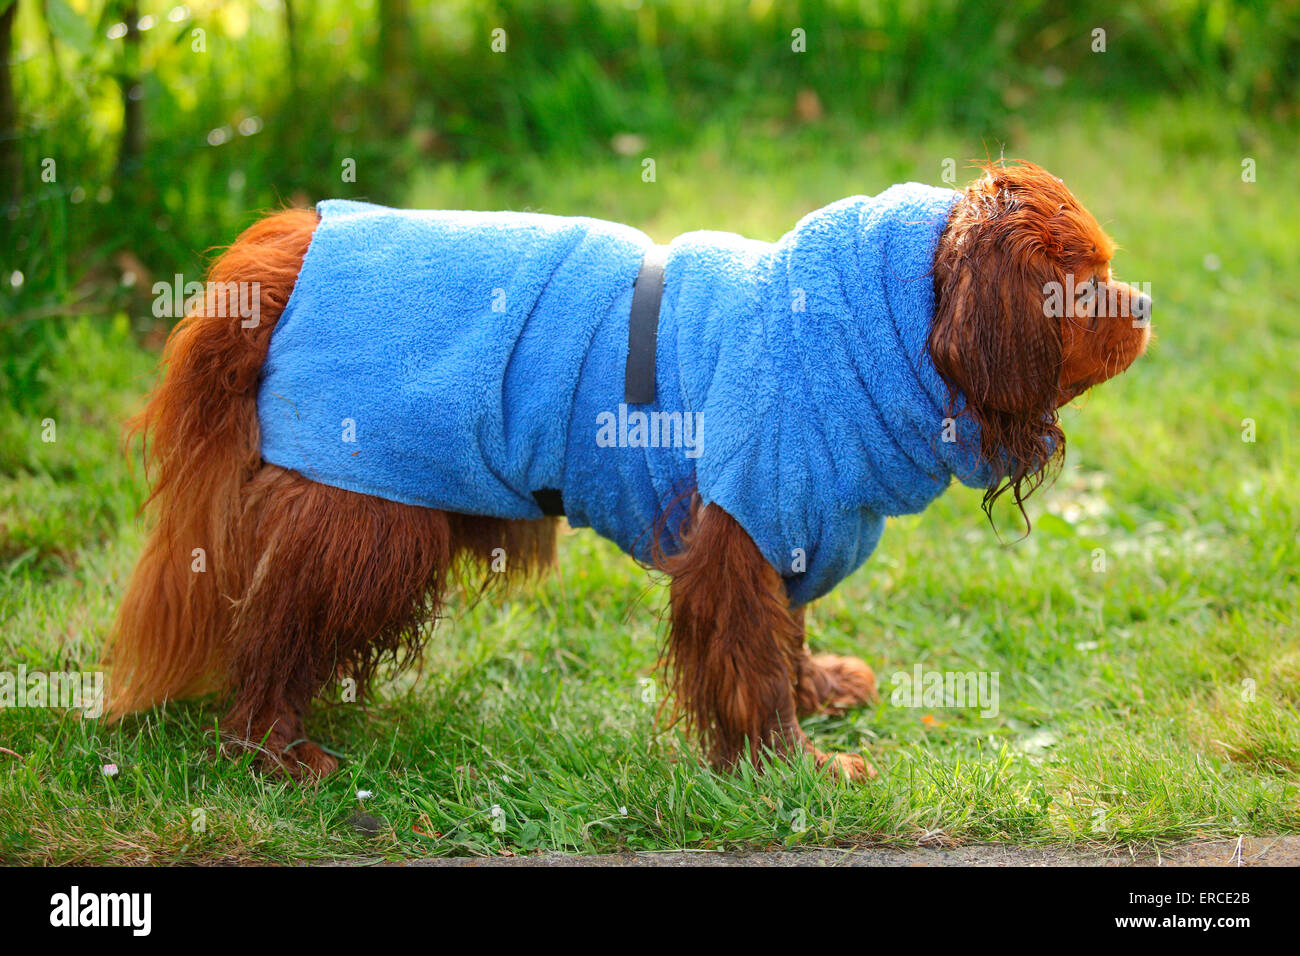 Cavalier King Charles Spaniel, homme, ruby, wearing bathrobe, Texel, Pays-Bas|Cavalier King Charles Spaniel, Ruede, ruby, mit Banque D'Images